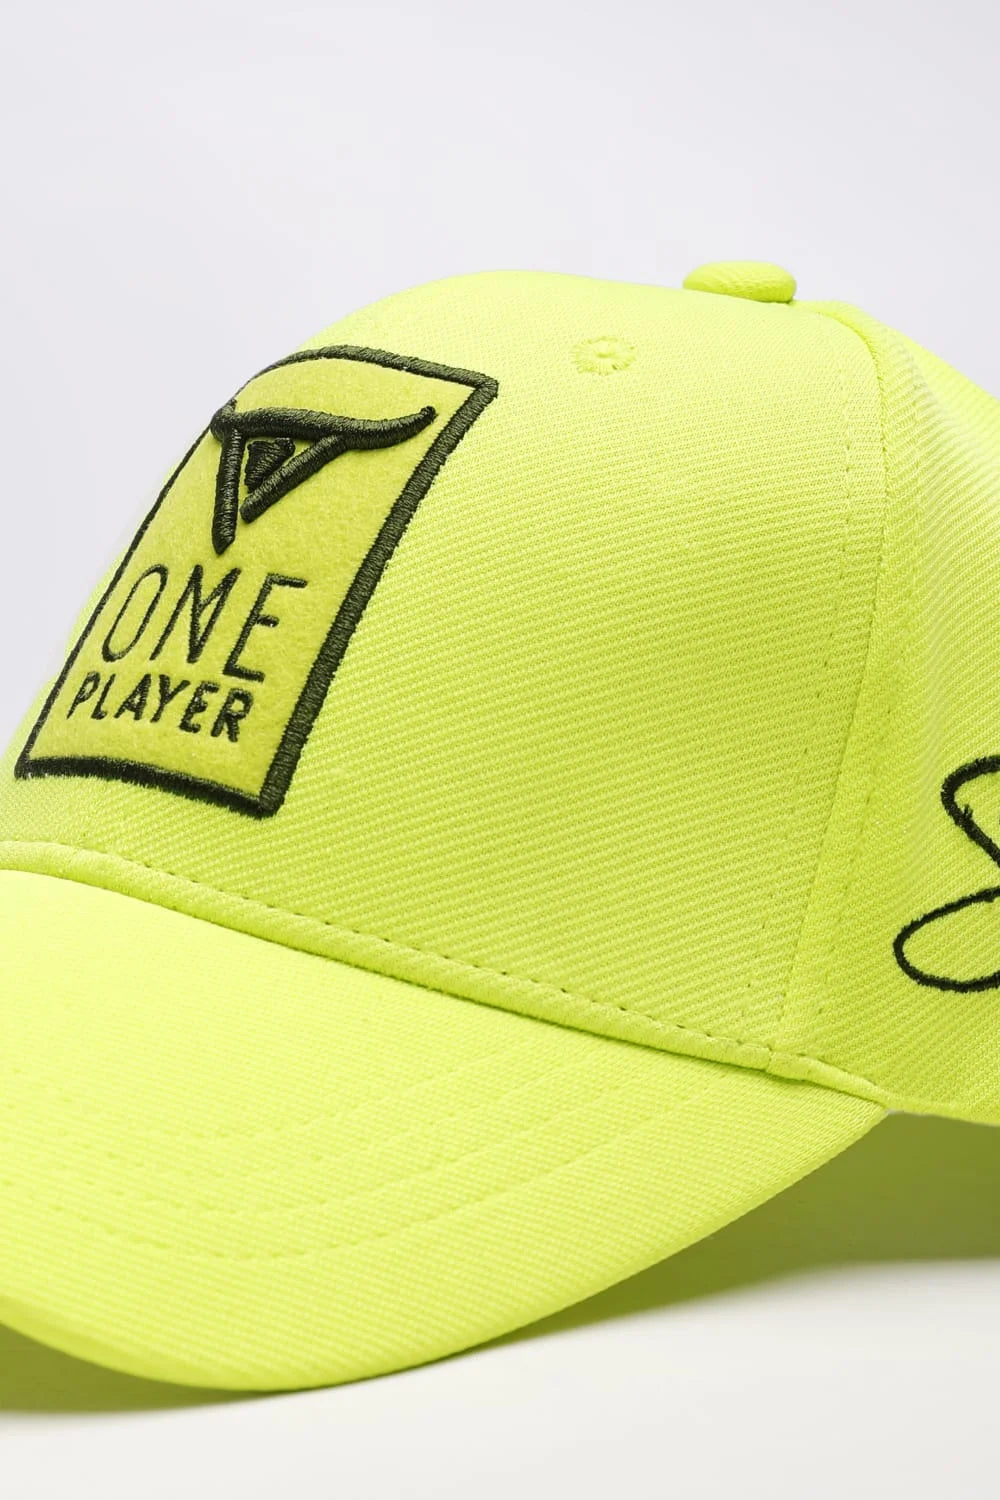 Unisex Yellow solid baseball cap, has a visor by One Player